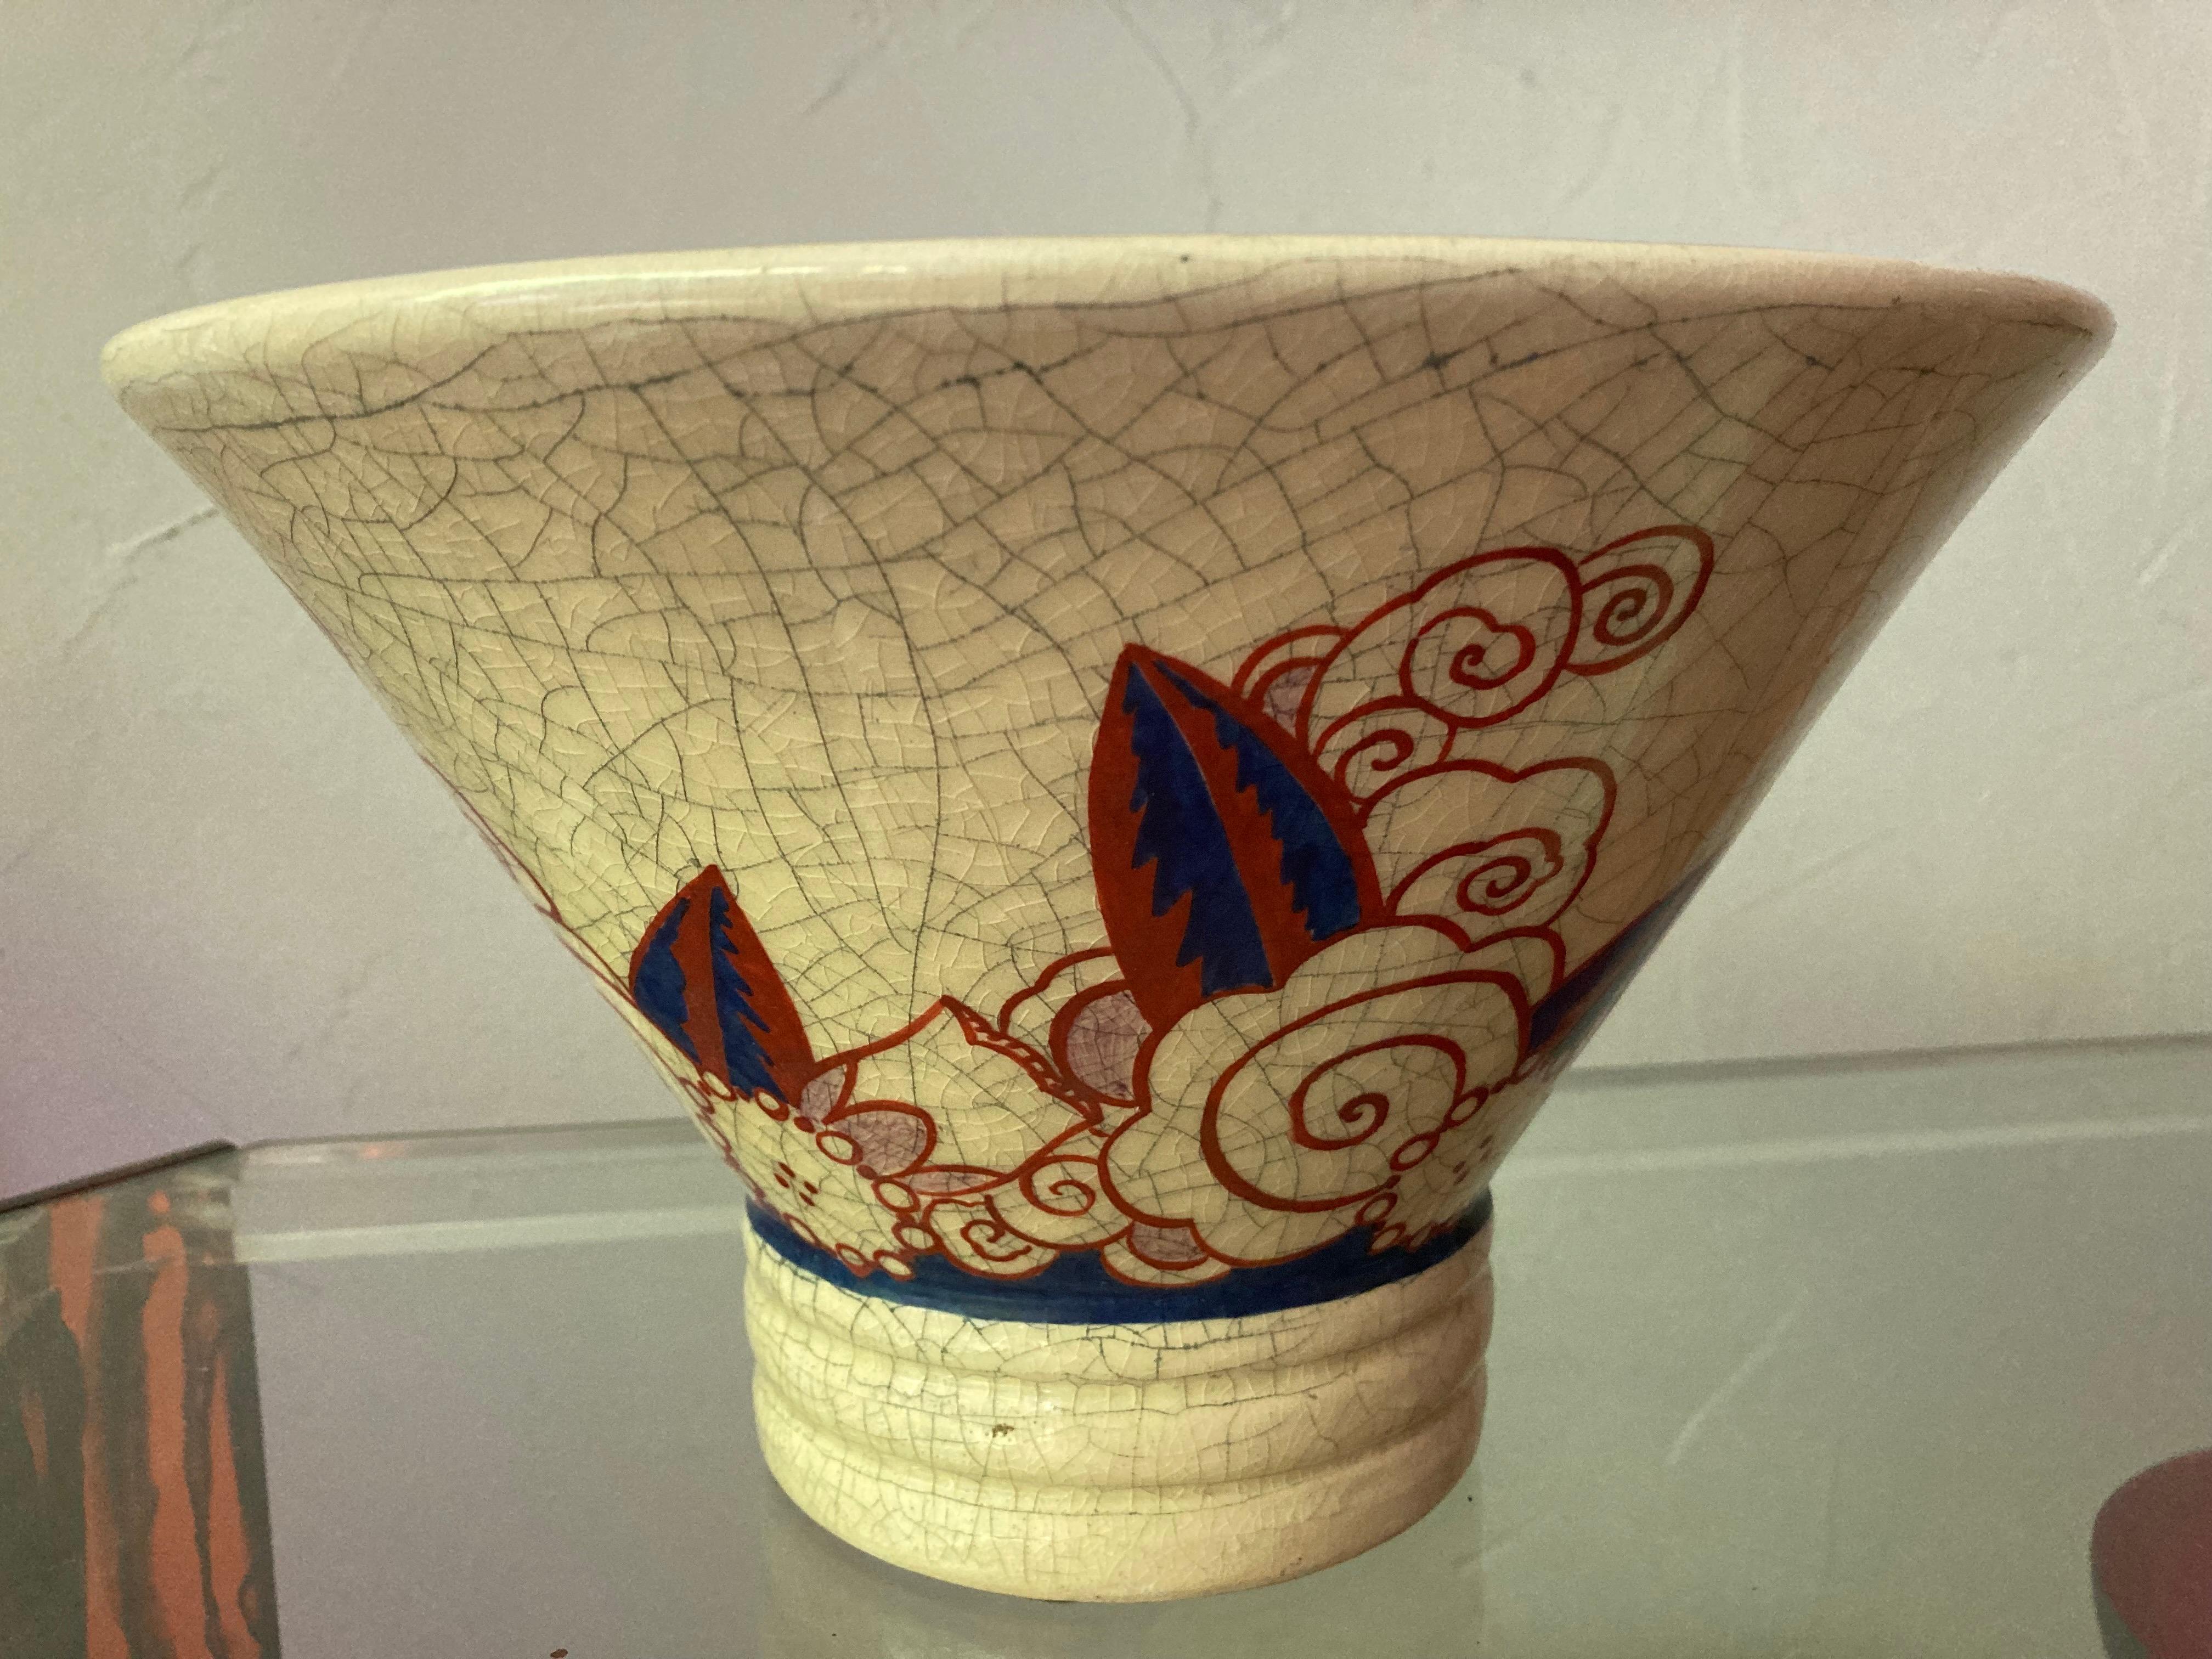 French Art Deco Crackled Ceramic Bowl by Jacques Adnet, Company Lusca, 1925 For Sale 3